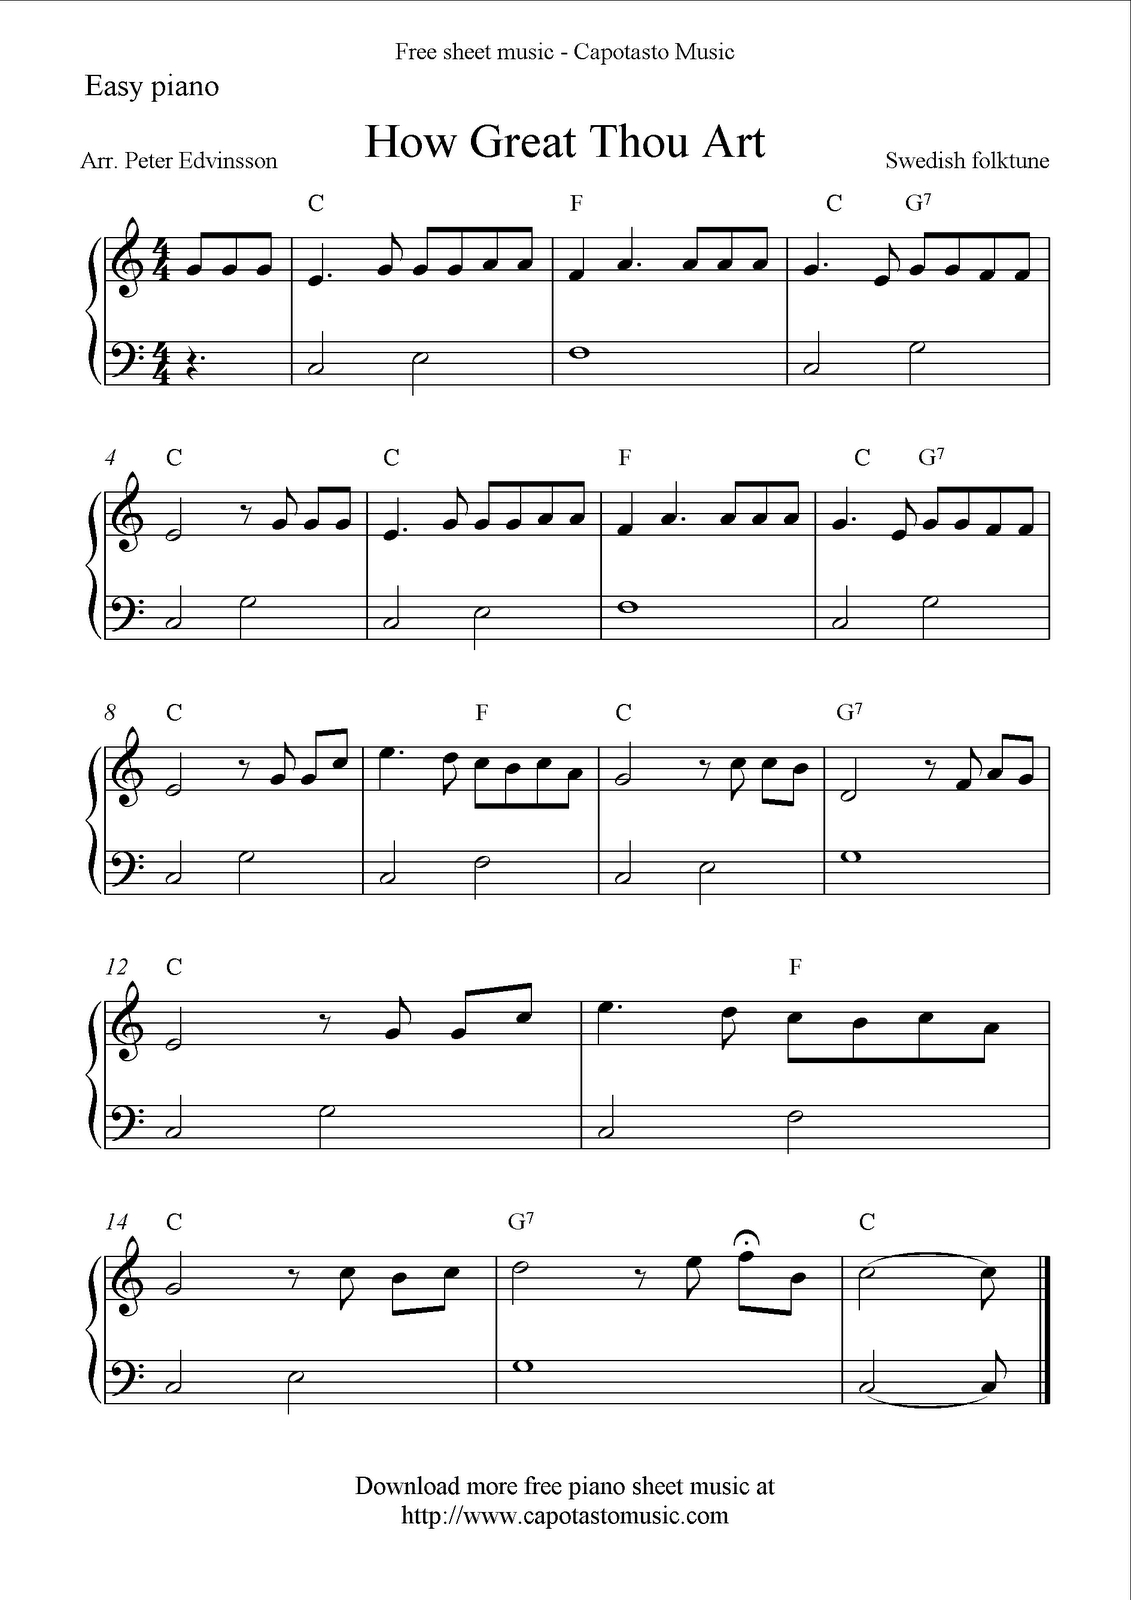 Free Sheet Music Pages &amp;amp; Guitar Lessons | Orchestra | Pinterest - Free Printable Piano Sheet Music For Popular Songs